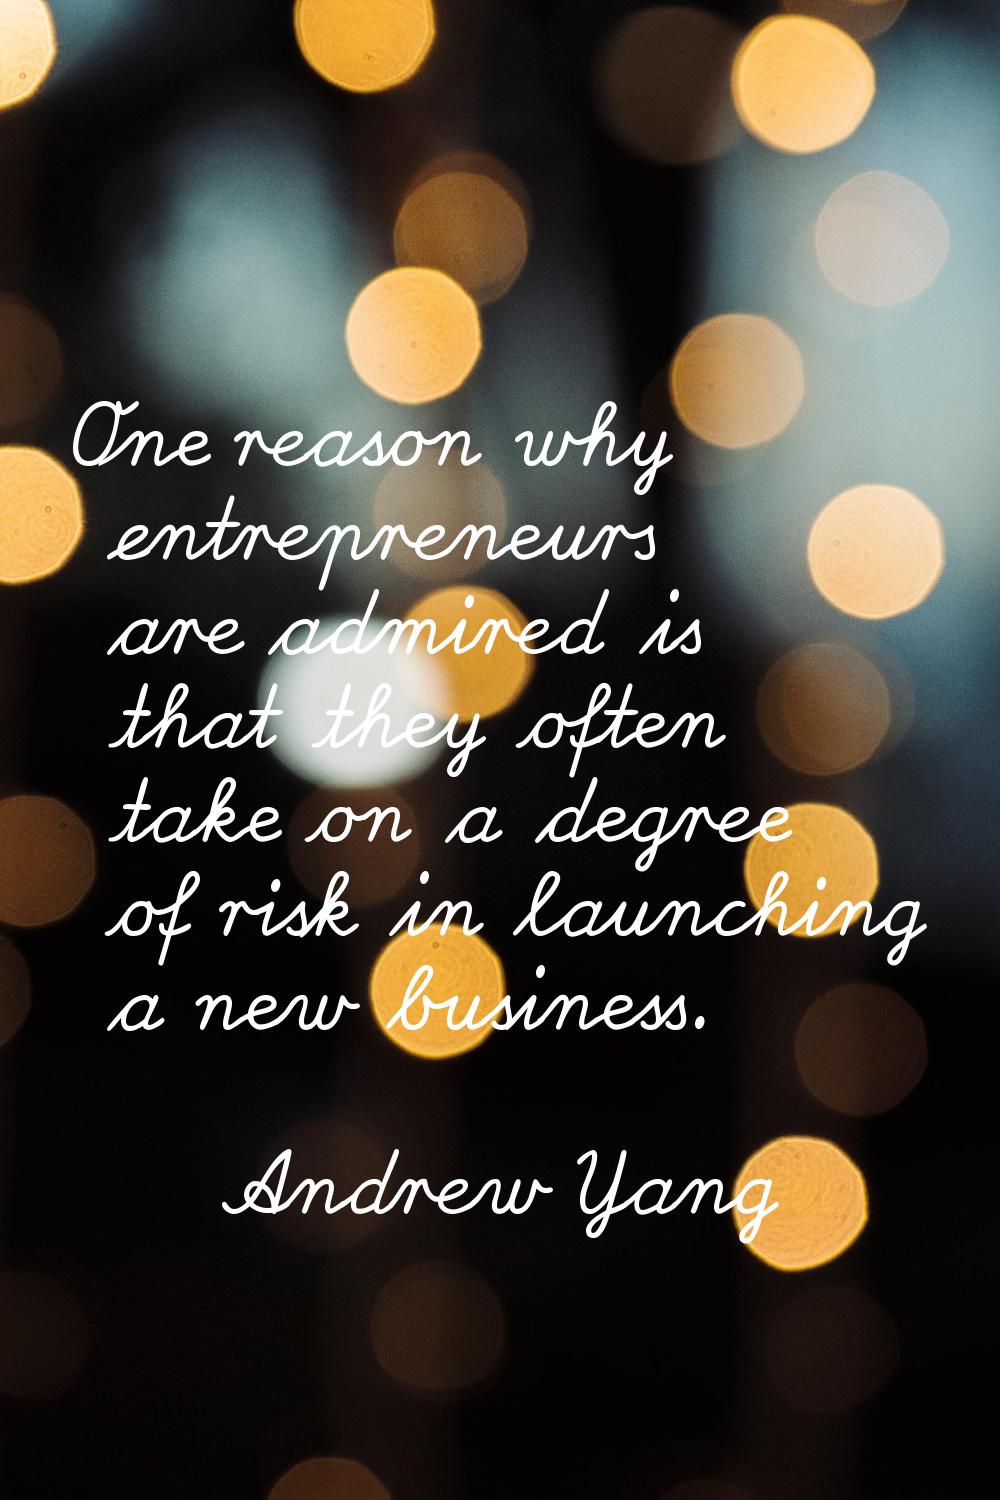 One reason why entrepreneurs are admired is that they often take on a degree of risk in launching a